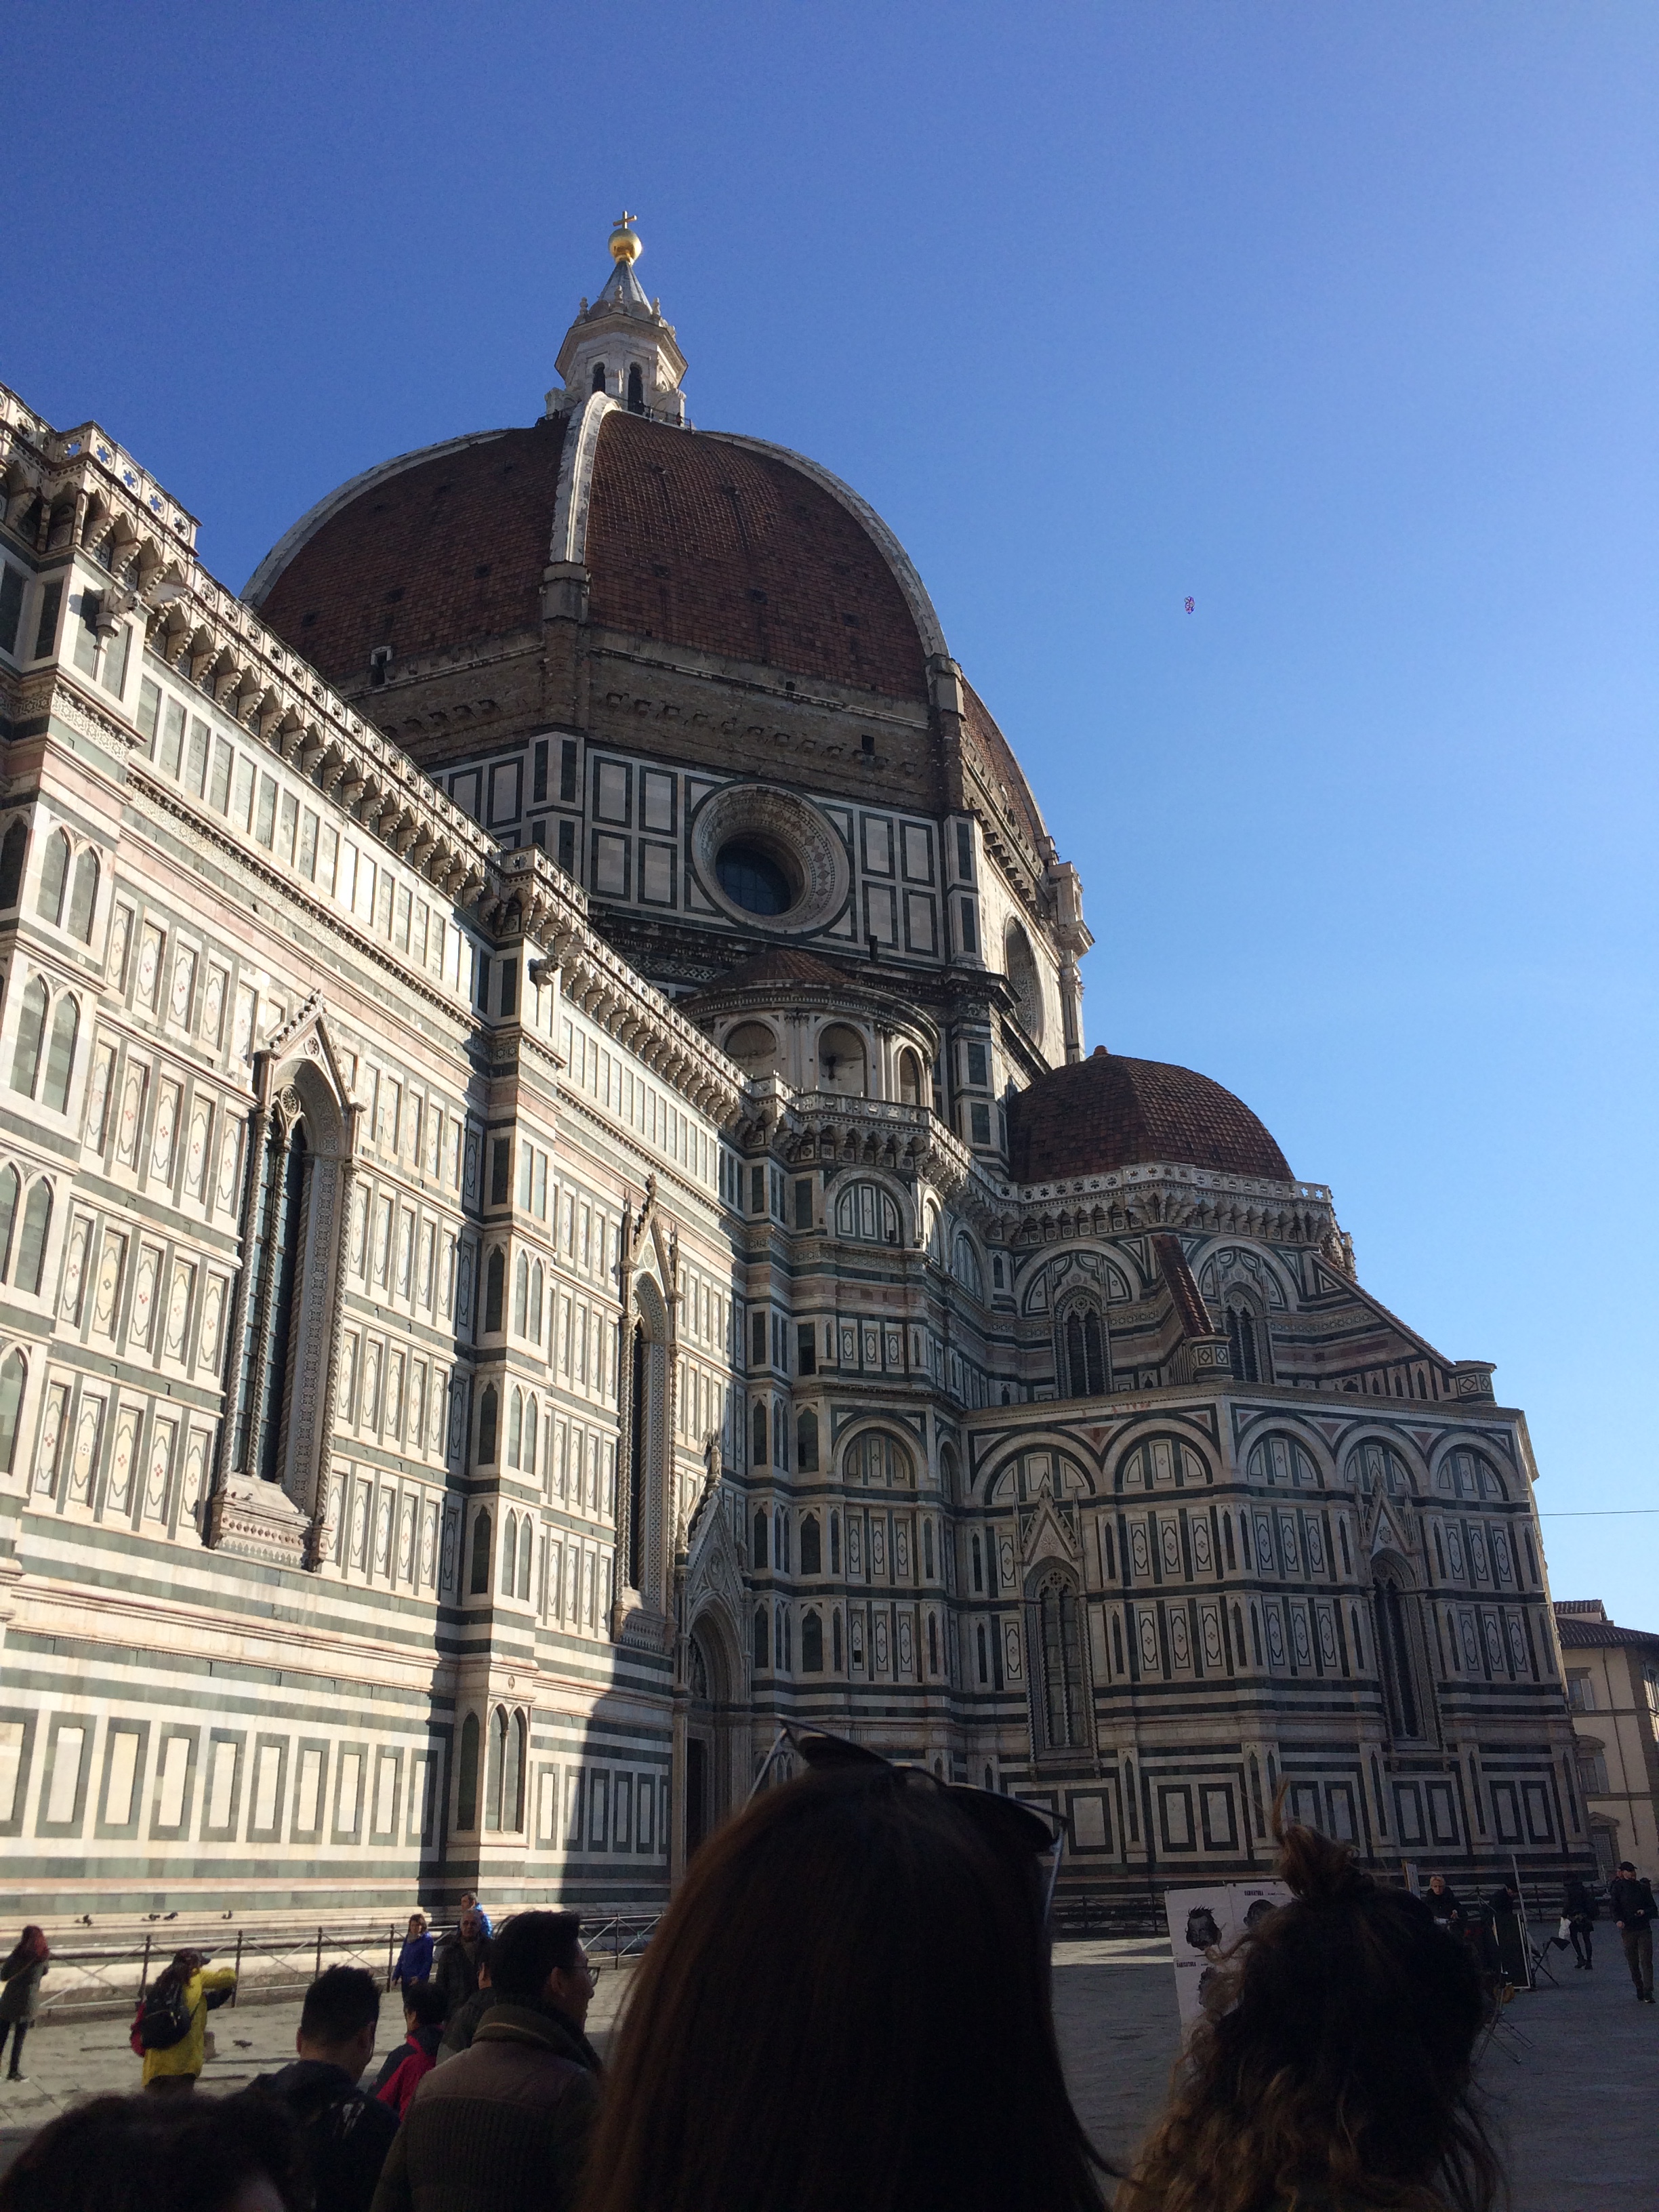 Image of the Duomo in Florence